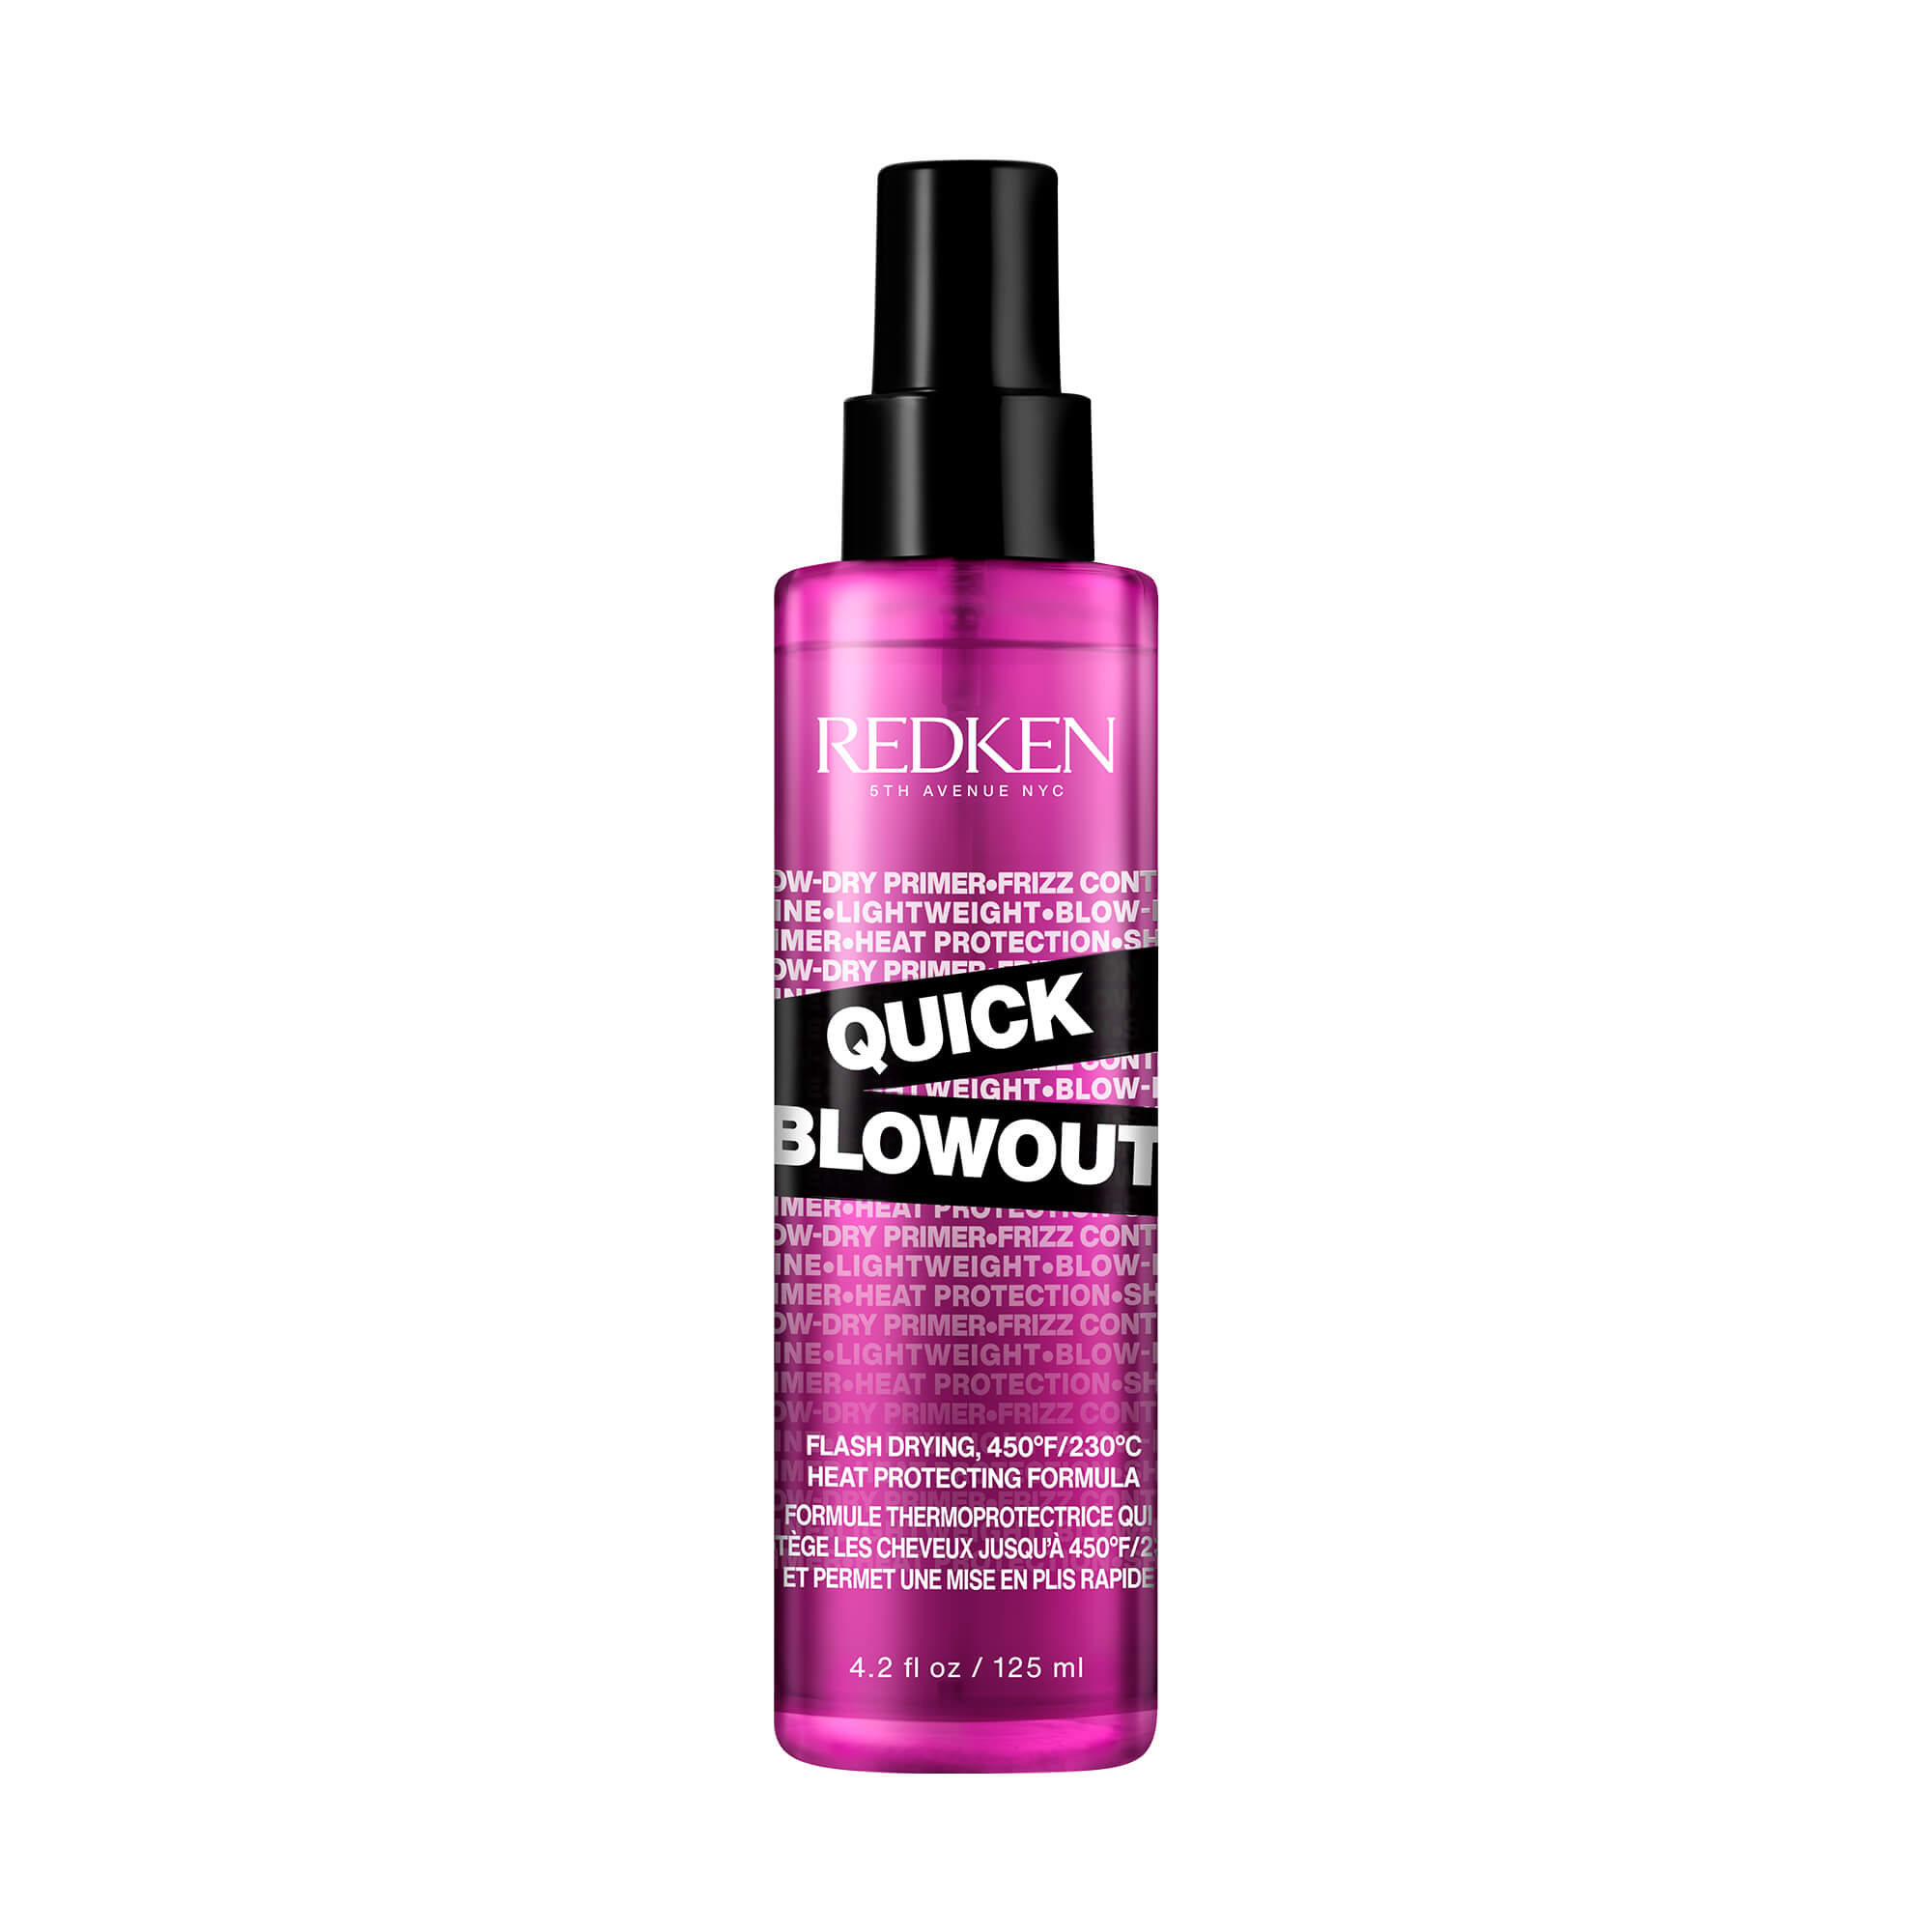 https://www.redken.ca/-/media/project/loreal/brand-sites/redken/americas/ca/product-information/product-images/styling/quick-blowout/quick-blowout-en/redken-us-2022-styling-reno-heat-styling-quick-blowout-ecom-atf-packshot-2000x2000-01.jpg